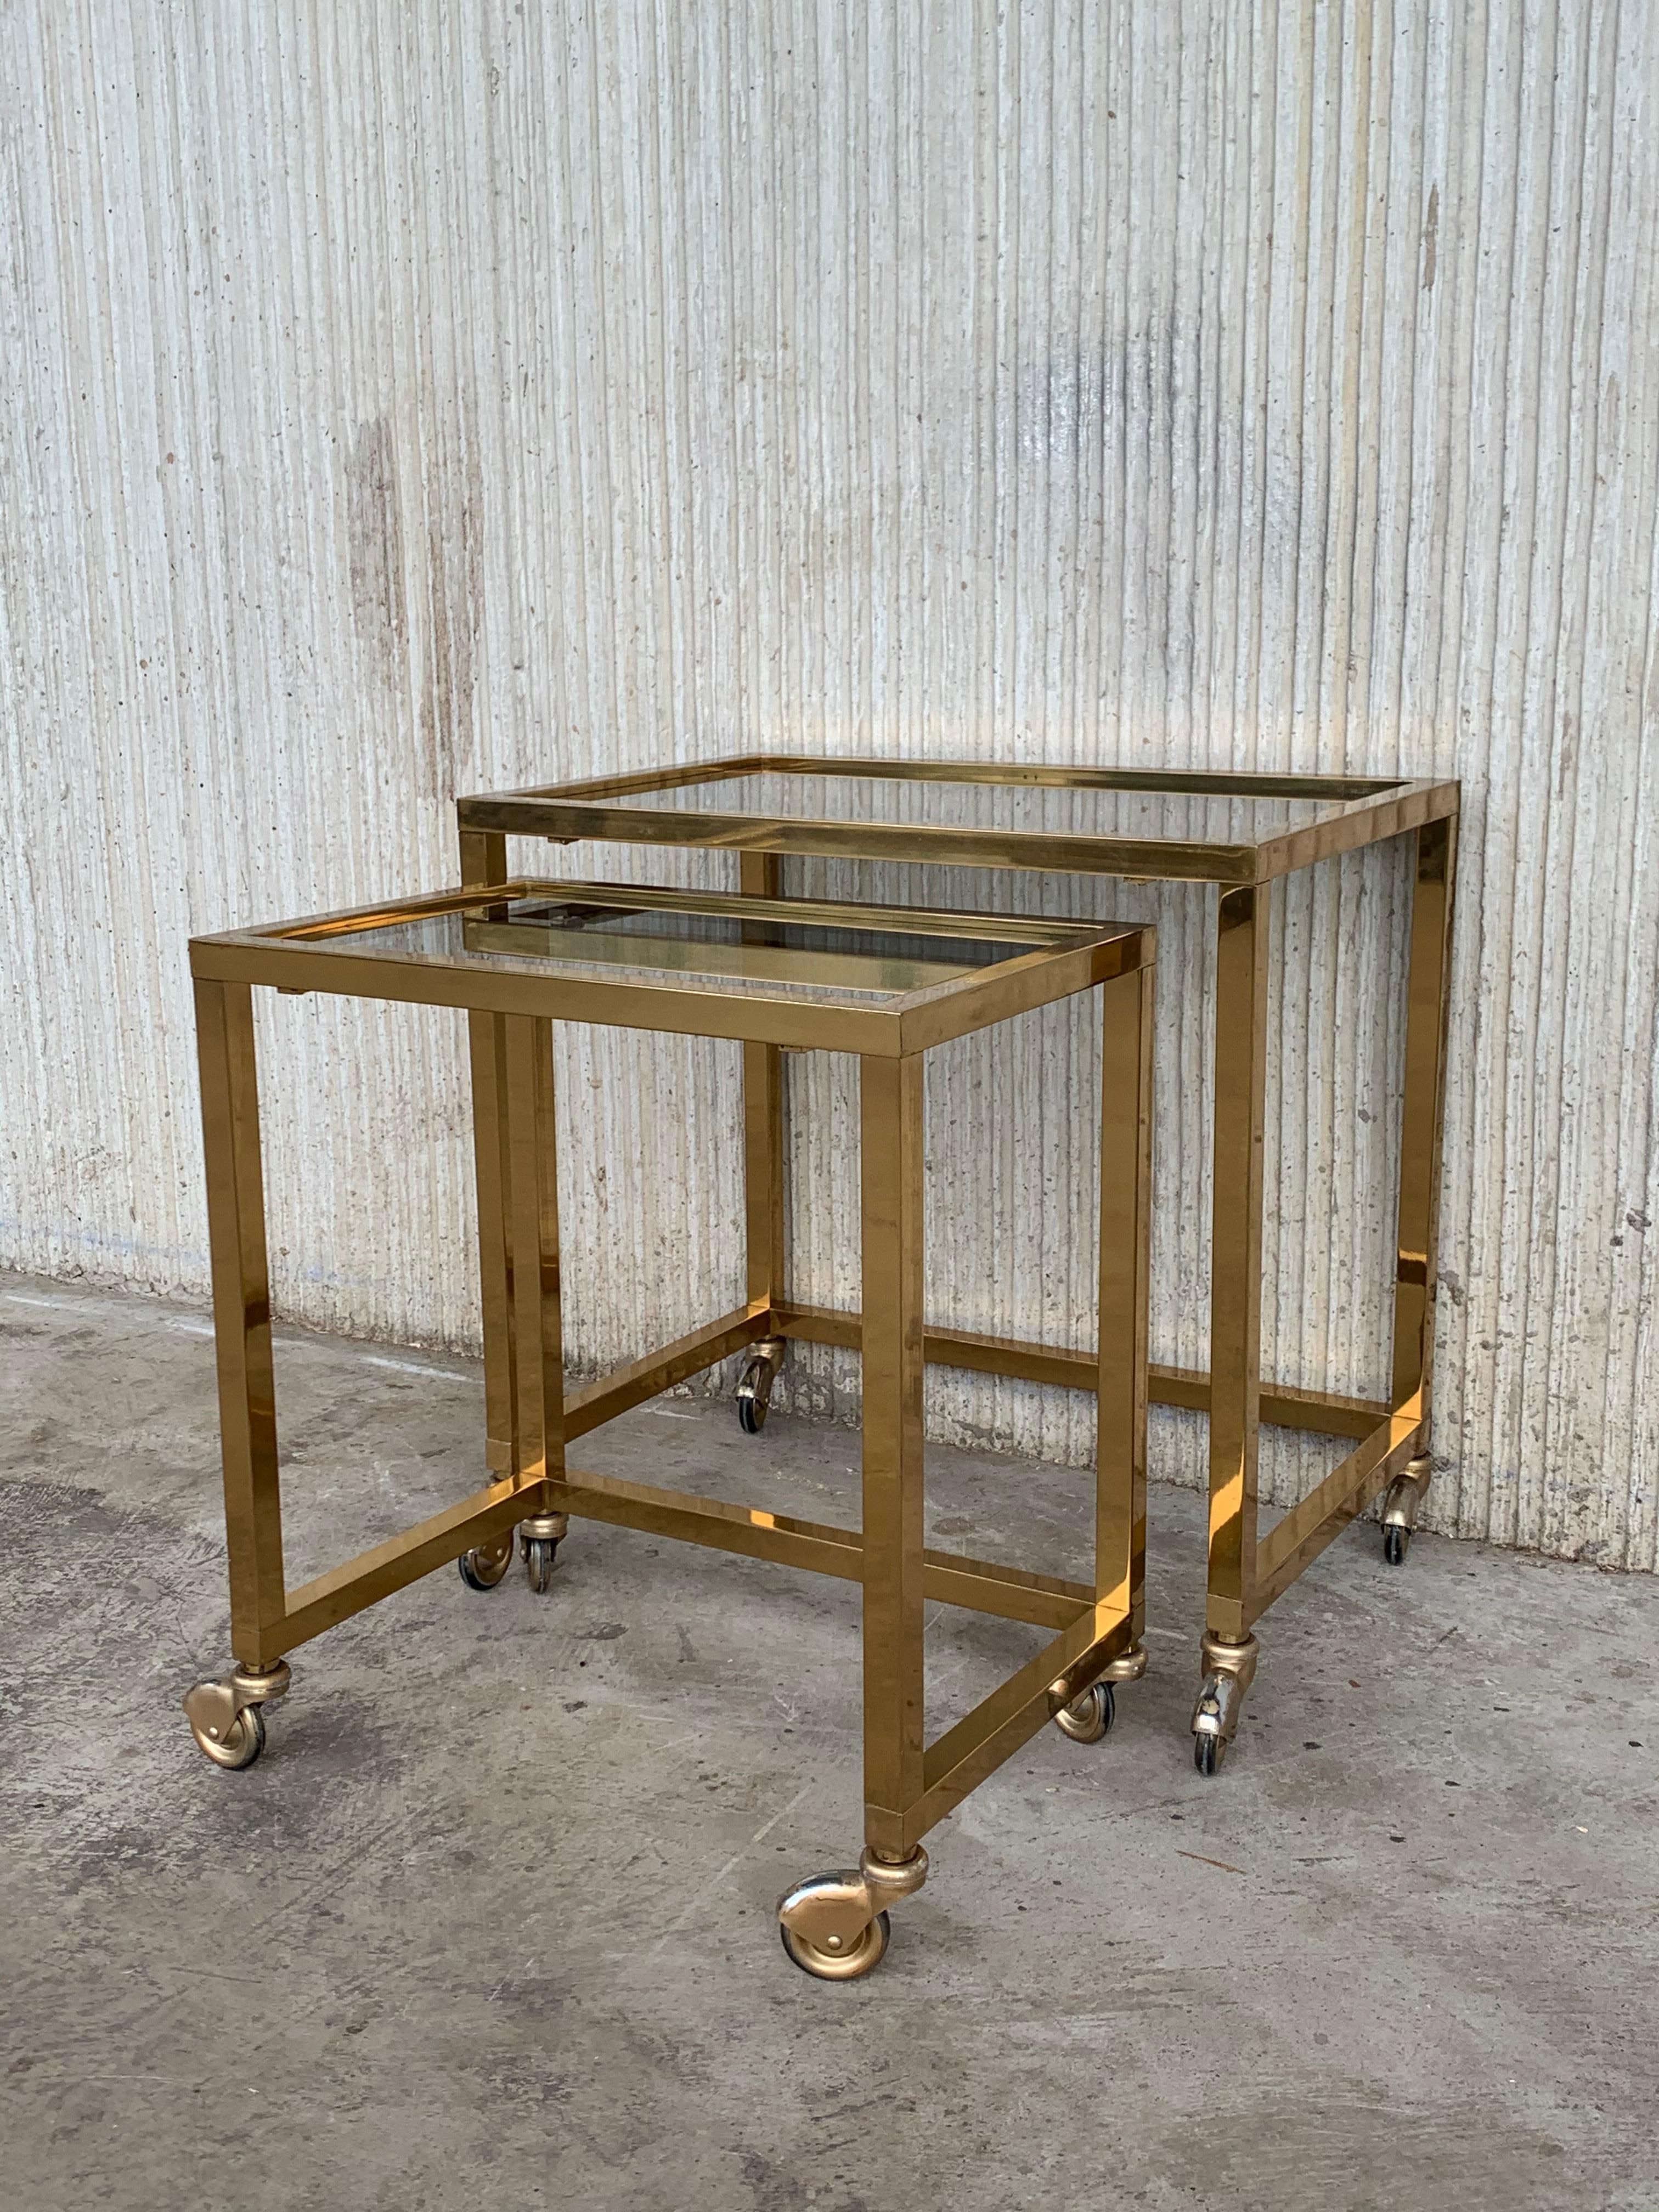 Pair of Italians nesting tables, brass in original patina and glasses in perfect conditions, they are on wheels.

Measures: Large W 19.68in, D 13in, H 19.68in
Small W 15.75in, D 10.63in, H 17.9in.